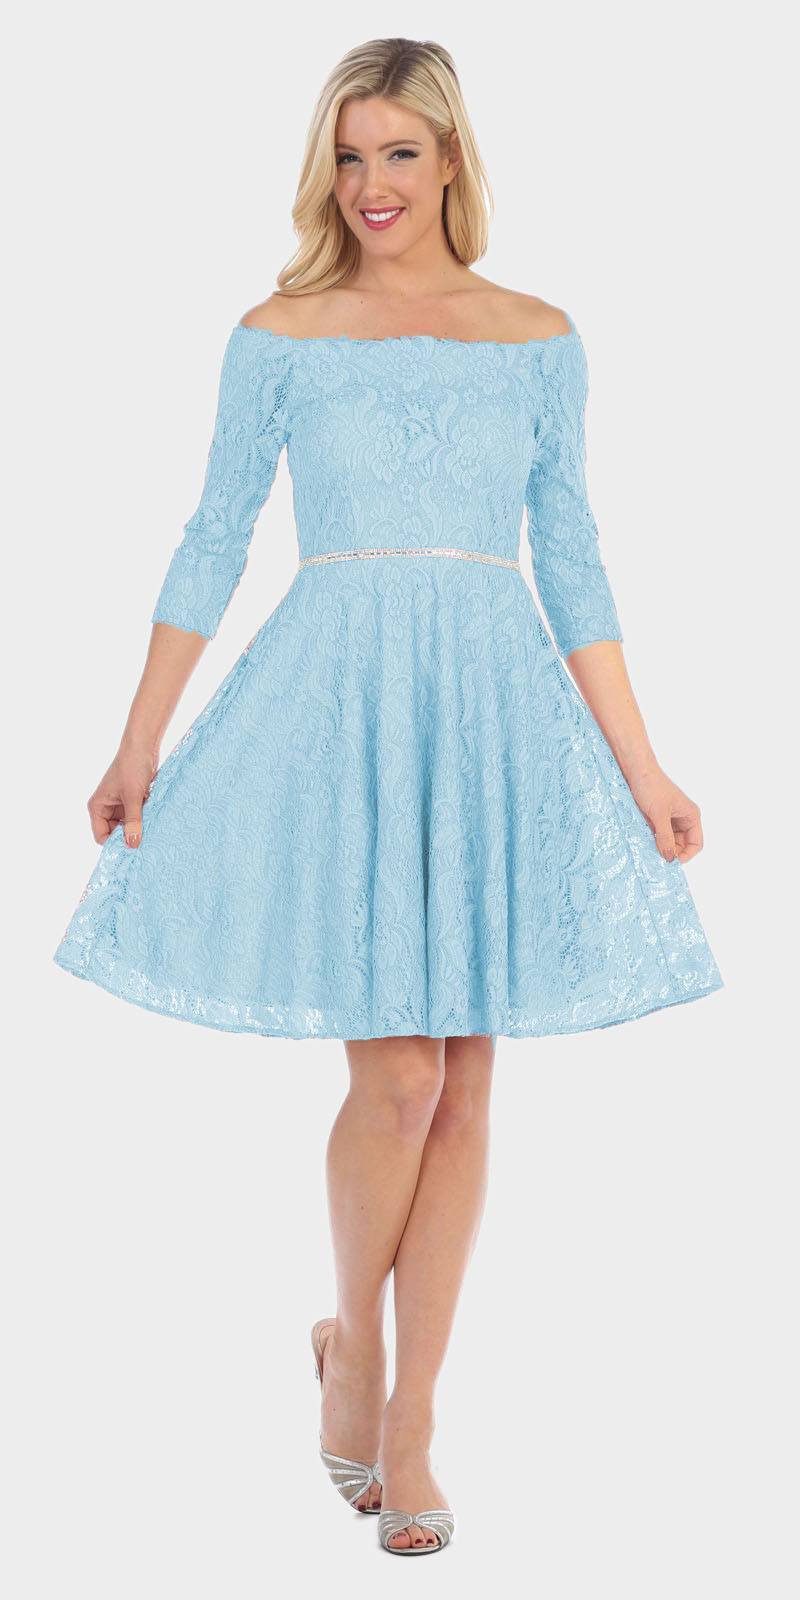 Celavie 6343 Off-the-Shoulder Short Lace Homecoming Dress Baby Blue